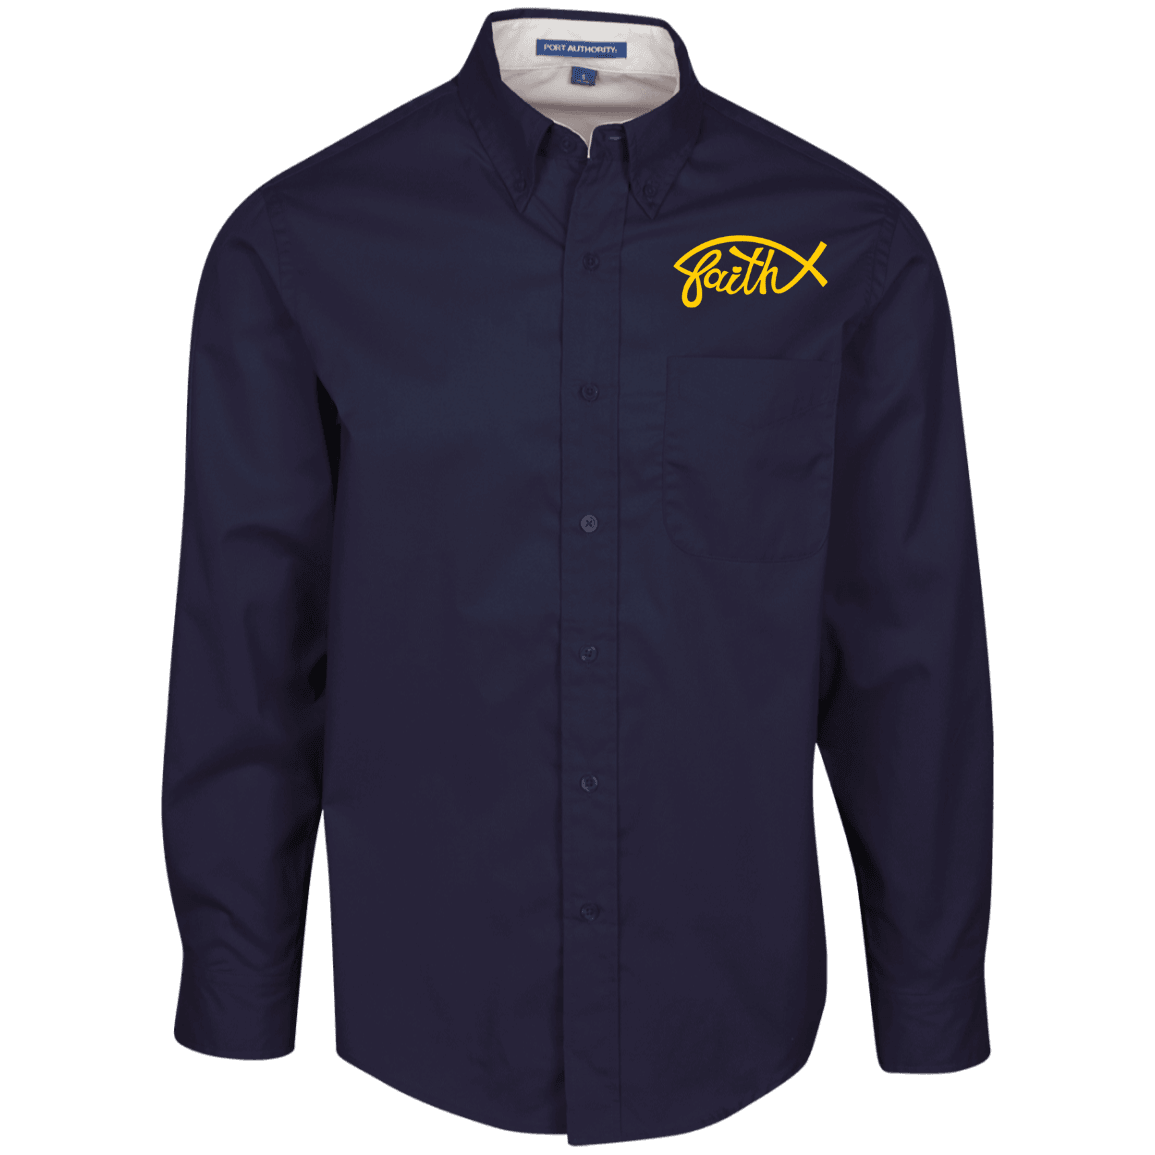 Designs by MyUtopia Shout Out:Faith Fish Embroidered Port Authority Men's Long Sleeve Dress Shirt - Navy Blue,Navy/Light Stone / X-Small,Dress Shirts